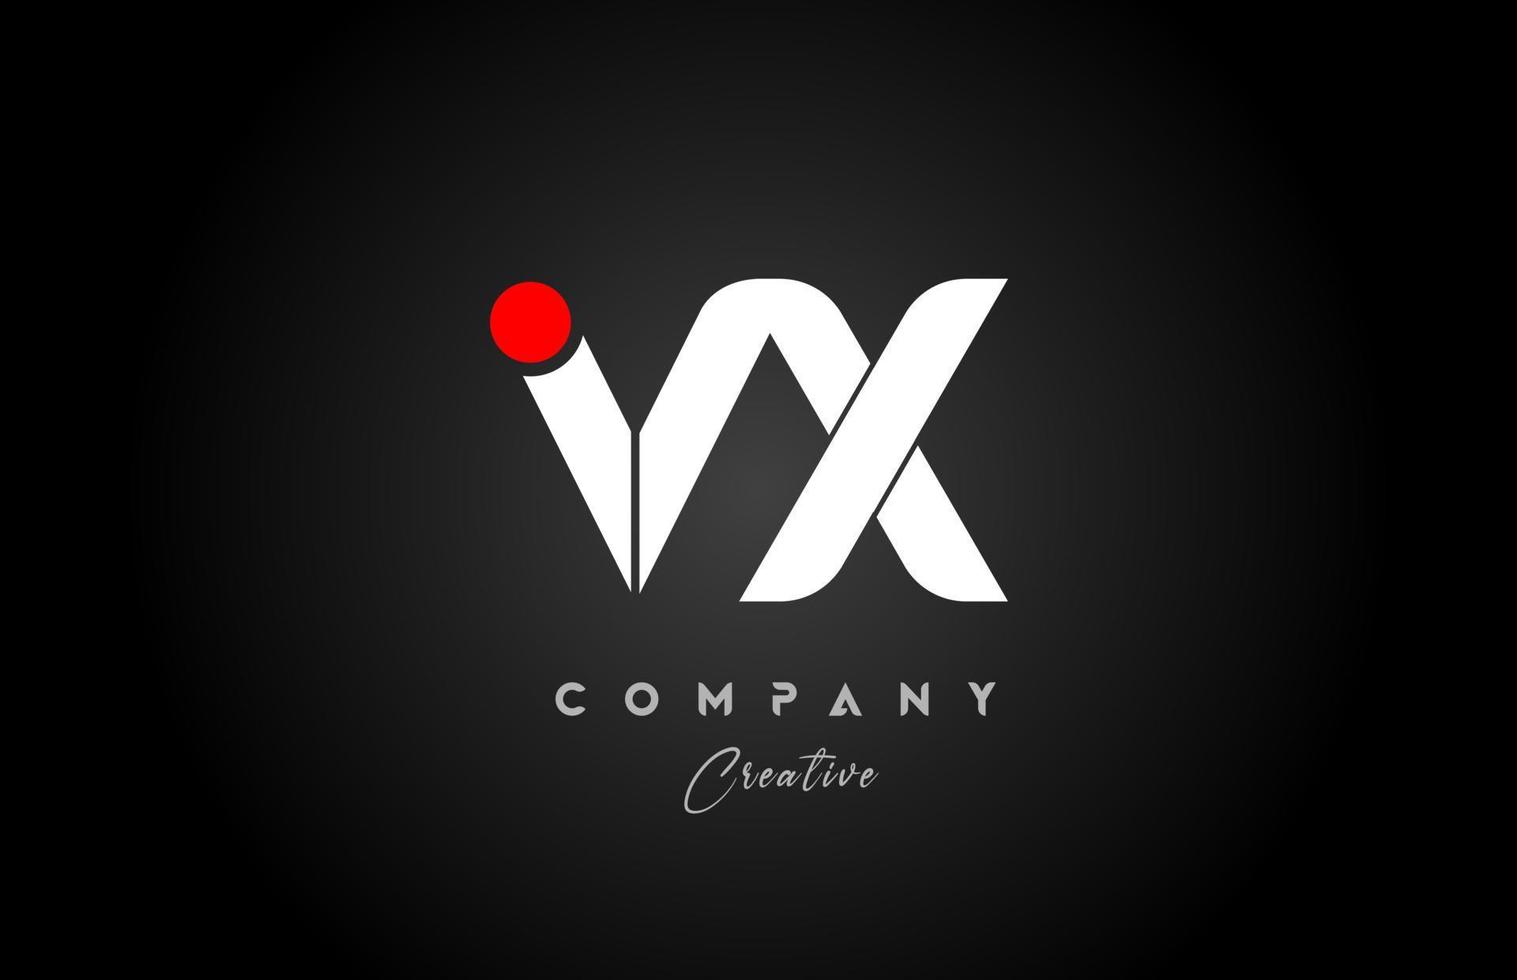 red white alphabet letter VX V X combination for company logo. Suitable as logotype vector